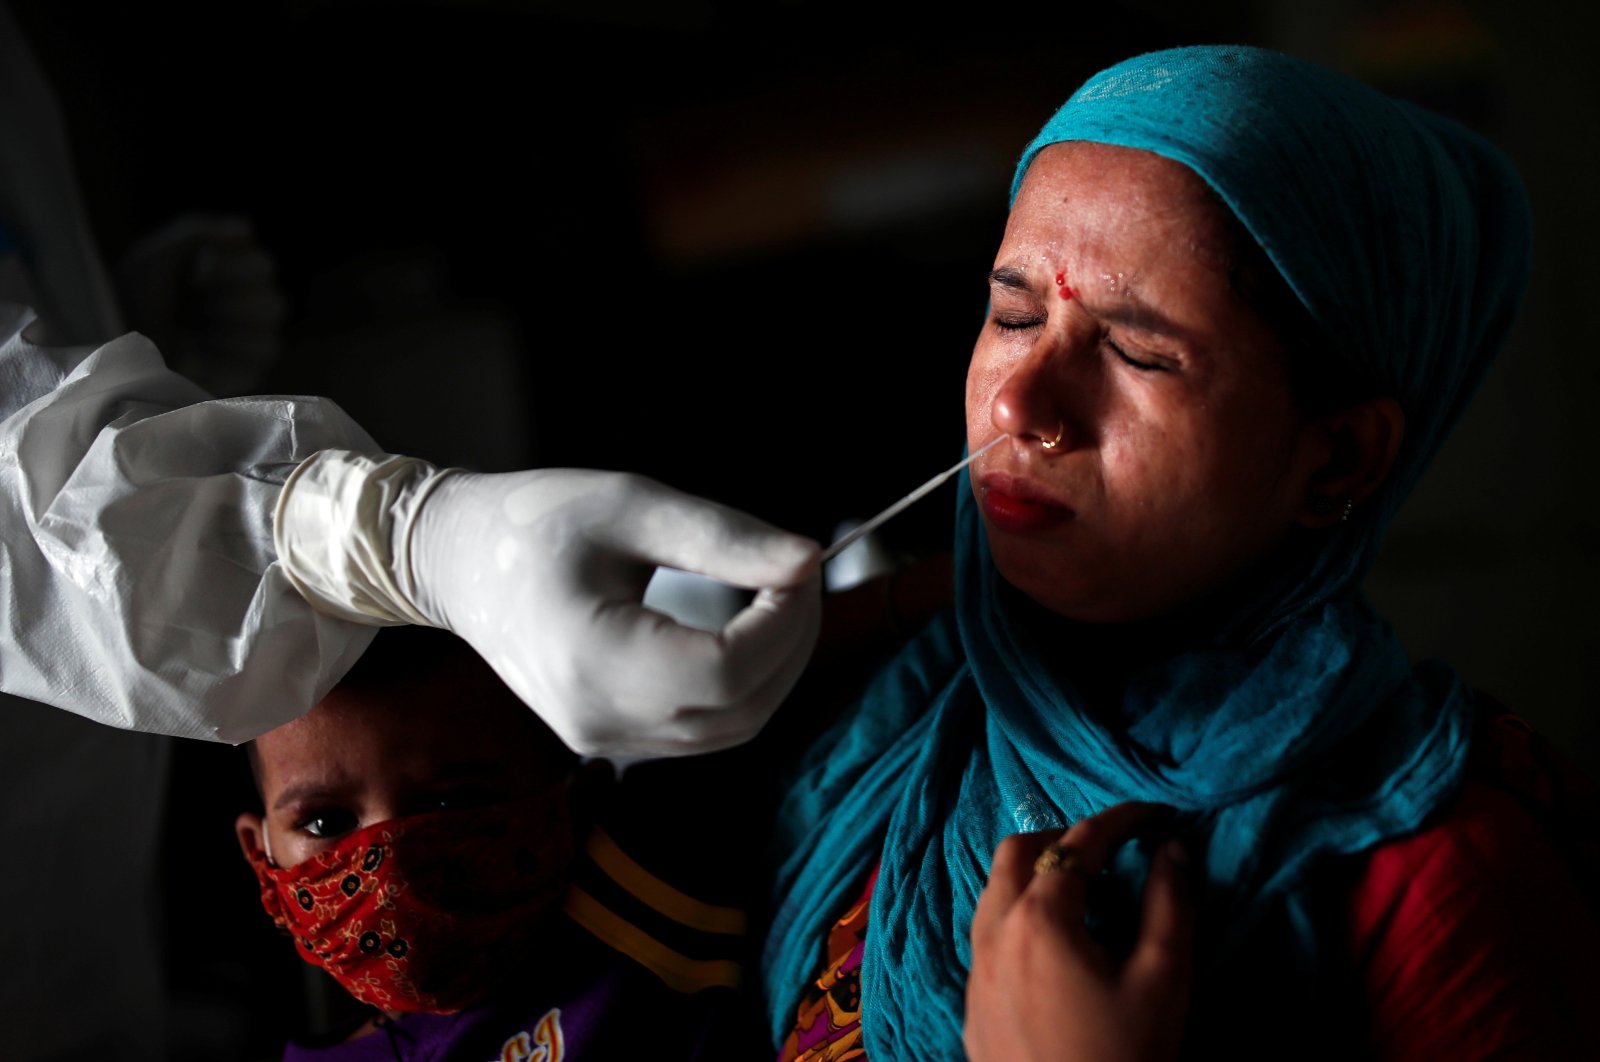 A medical health worker collects a sample from a woman using a swab, at a local health center to conduct tests for the coronavirus, in New Delhi, India, July 28, 2020. (Reuters Photo)